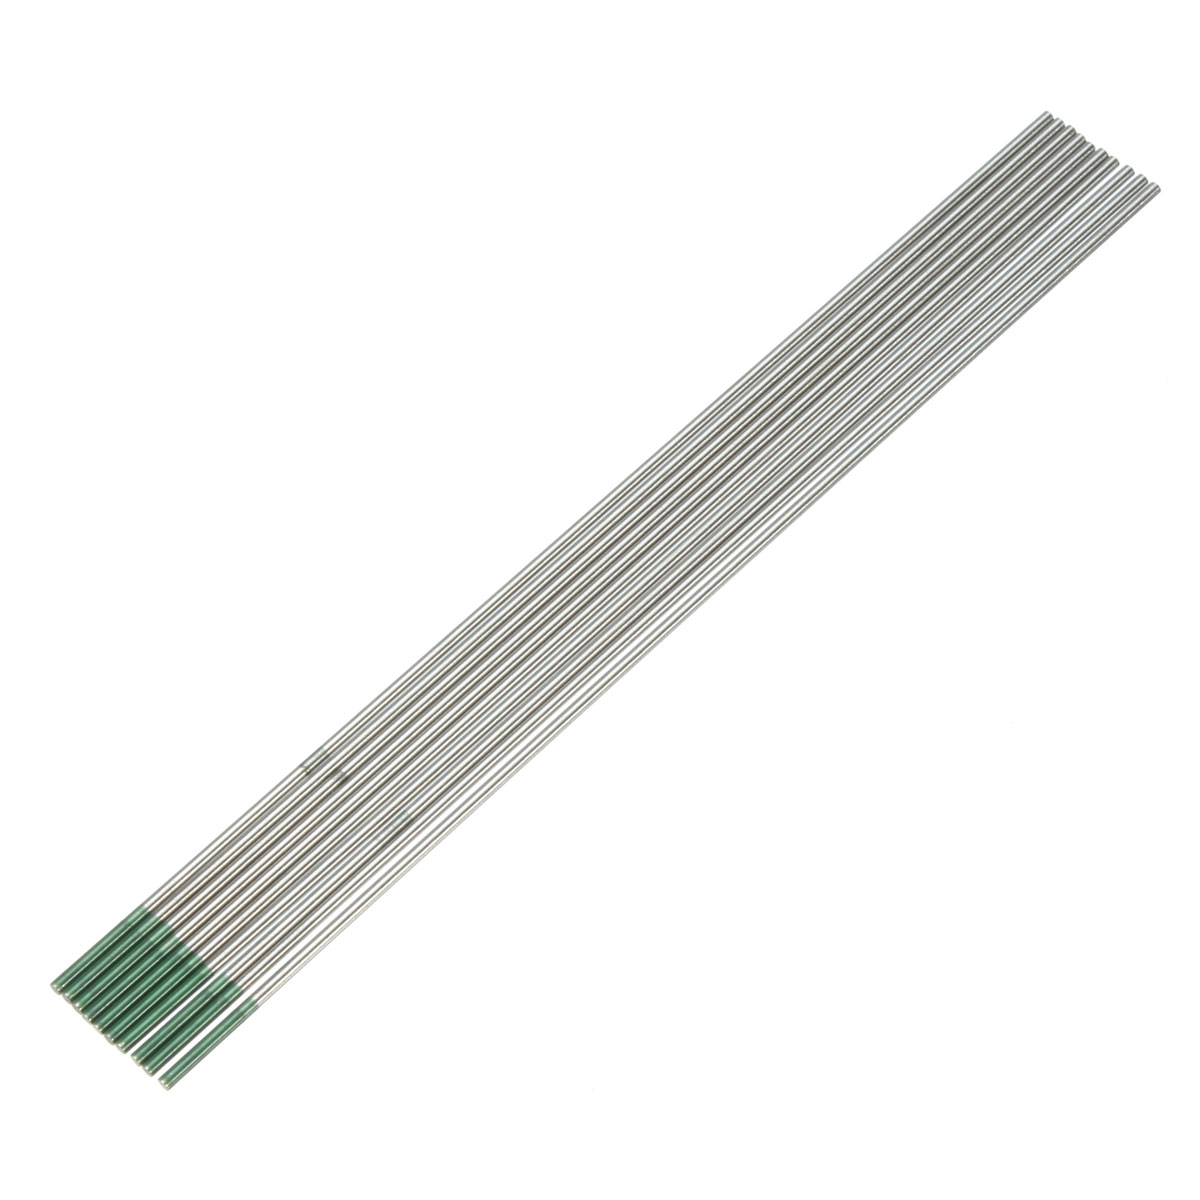 Green-Tip-Pure-Tungsten-Electrode-for-TIG-Welding-10PK--16mm-X-150mm-1056180-4